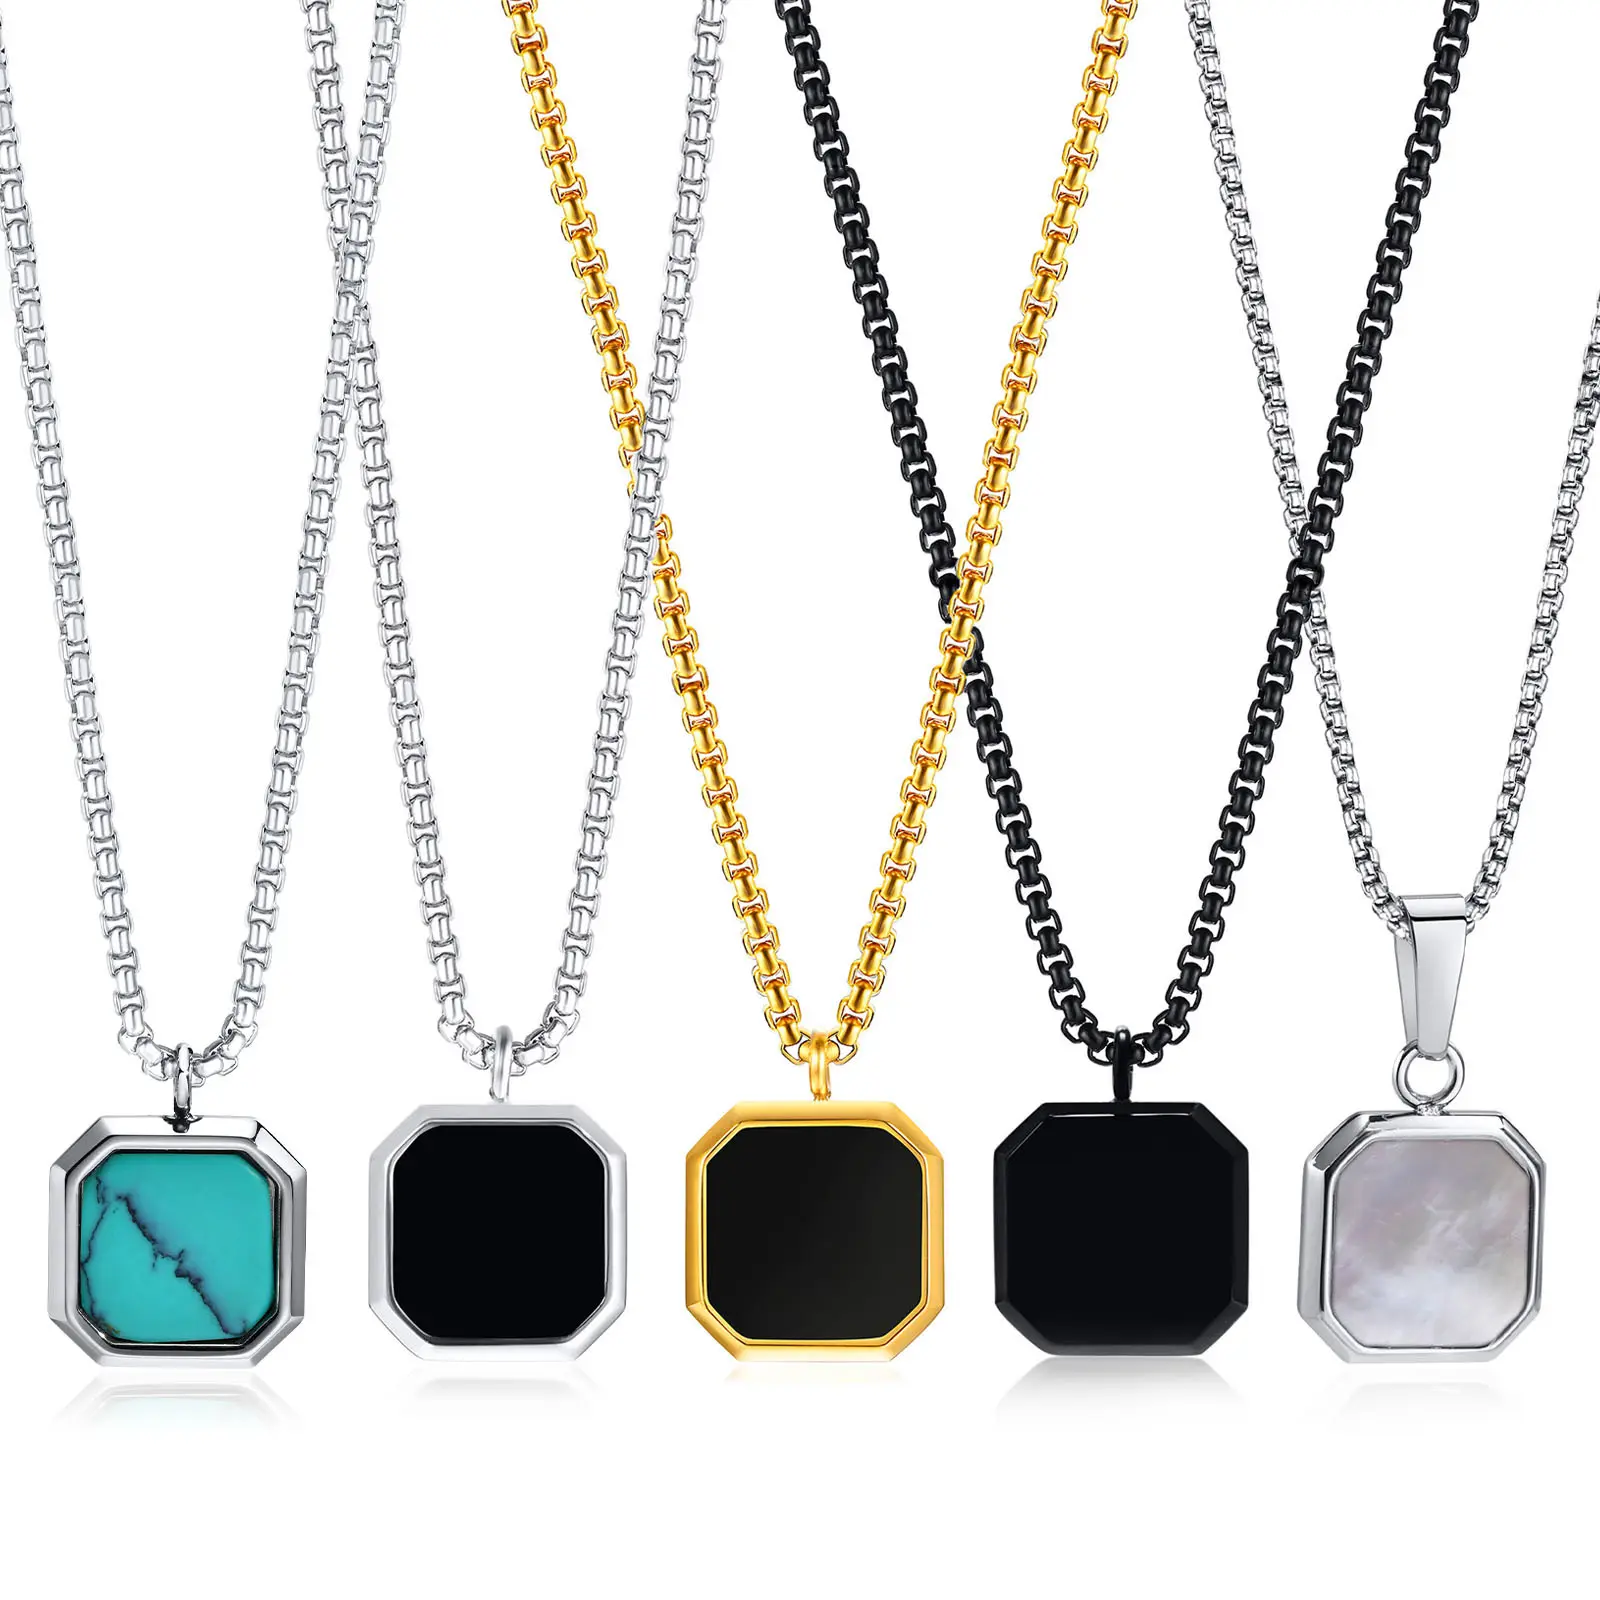 Hot Selling Geometric Square Epoxy Pendant Wholesale Long Sweater Chain Necklace Stainless Steel Jewelry For Men NC-892